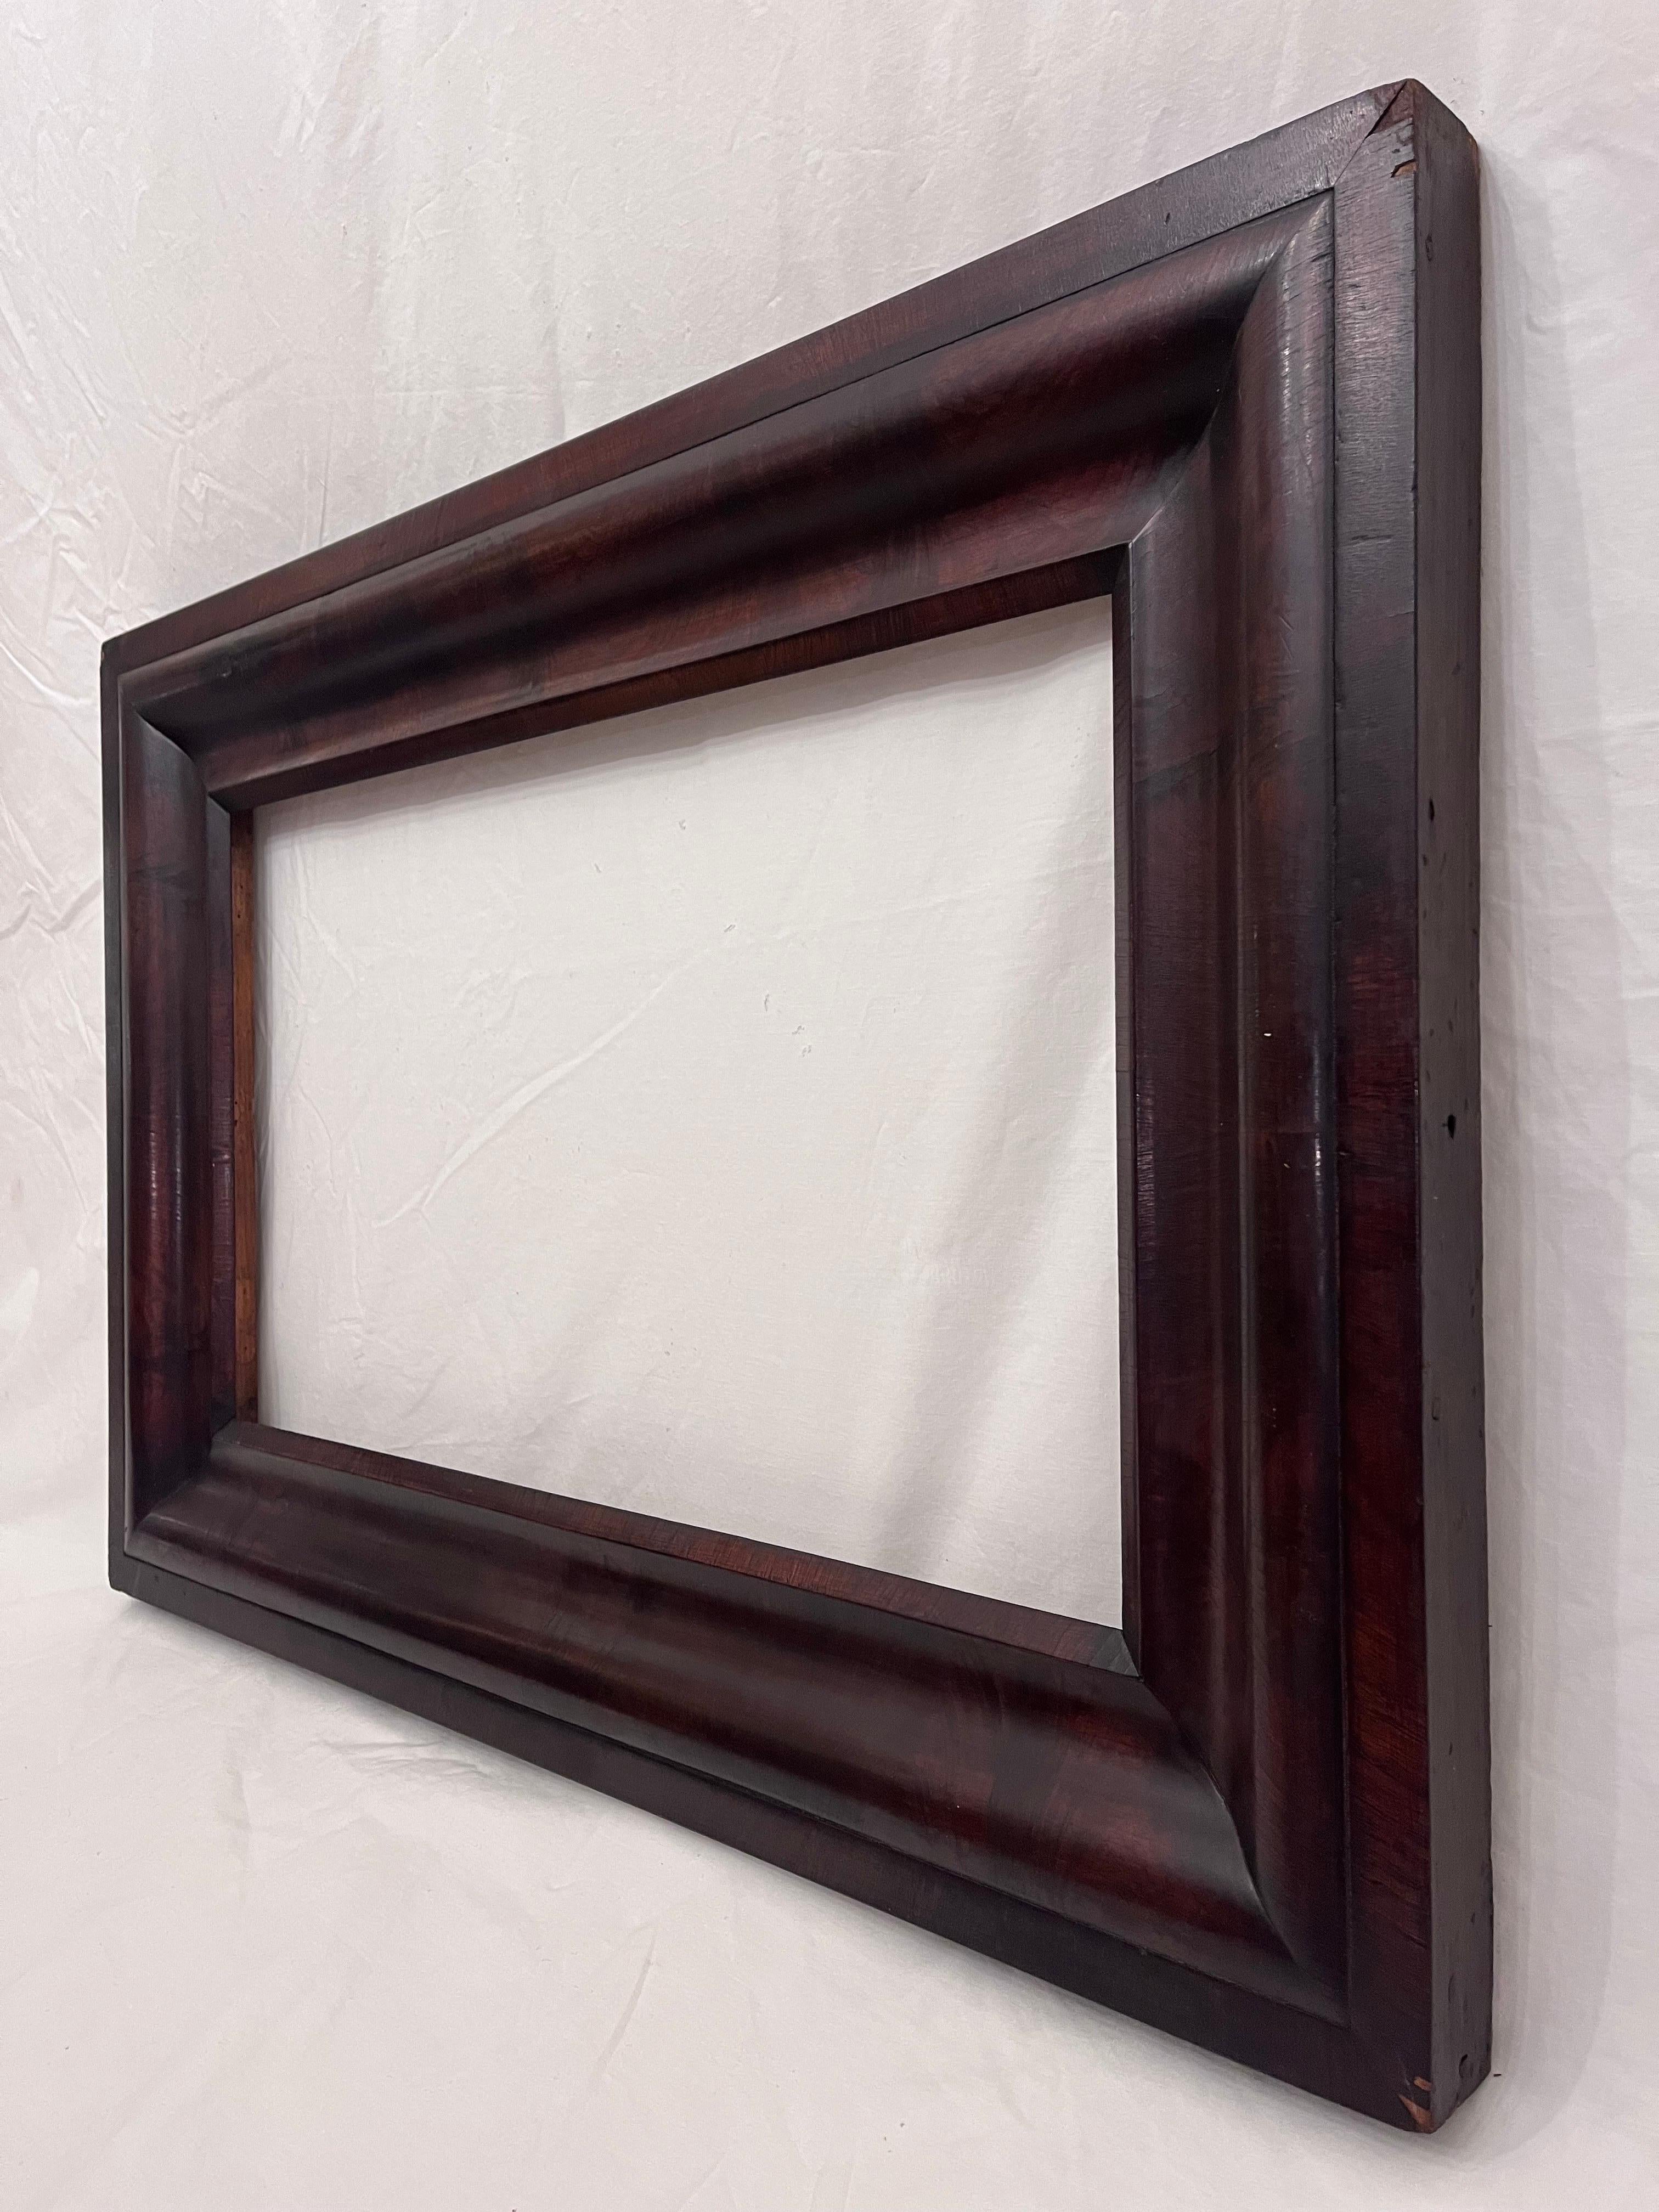 Antique 19th Century American Empire Style Large Picture Mirror Frame 22 x 13 For Sale 2